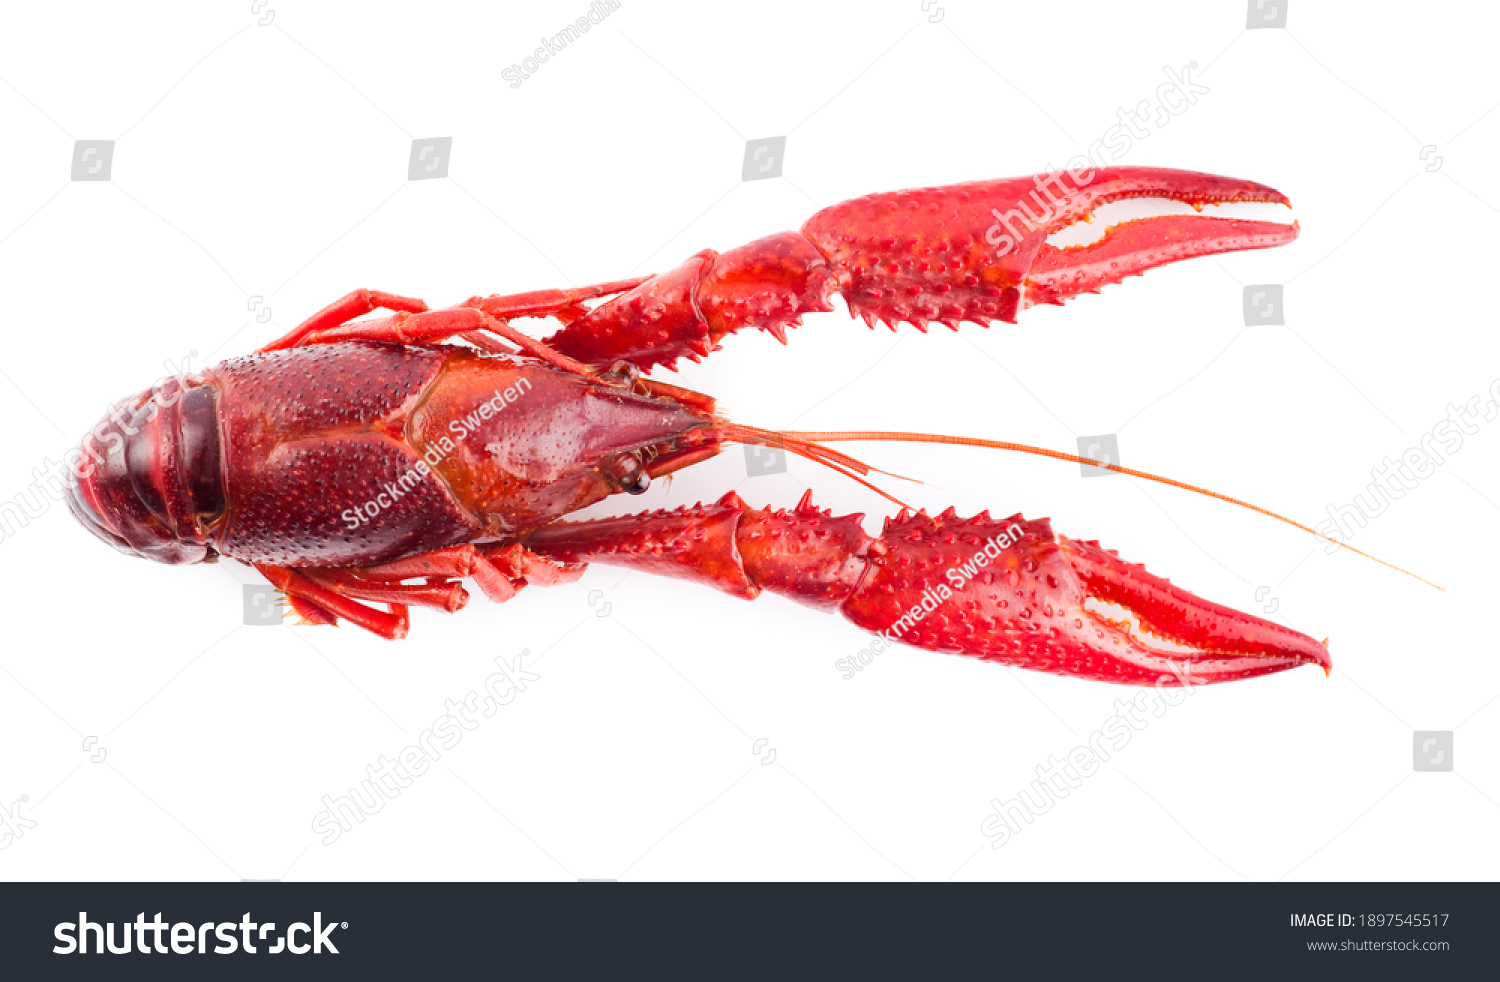 Top view of one single crayfish. Studio photo isolated on white background. Selective focus on object. #1897545517